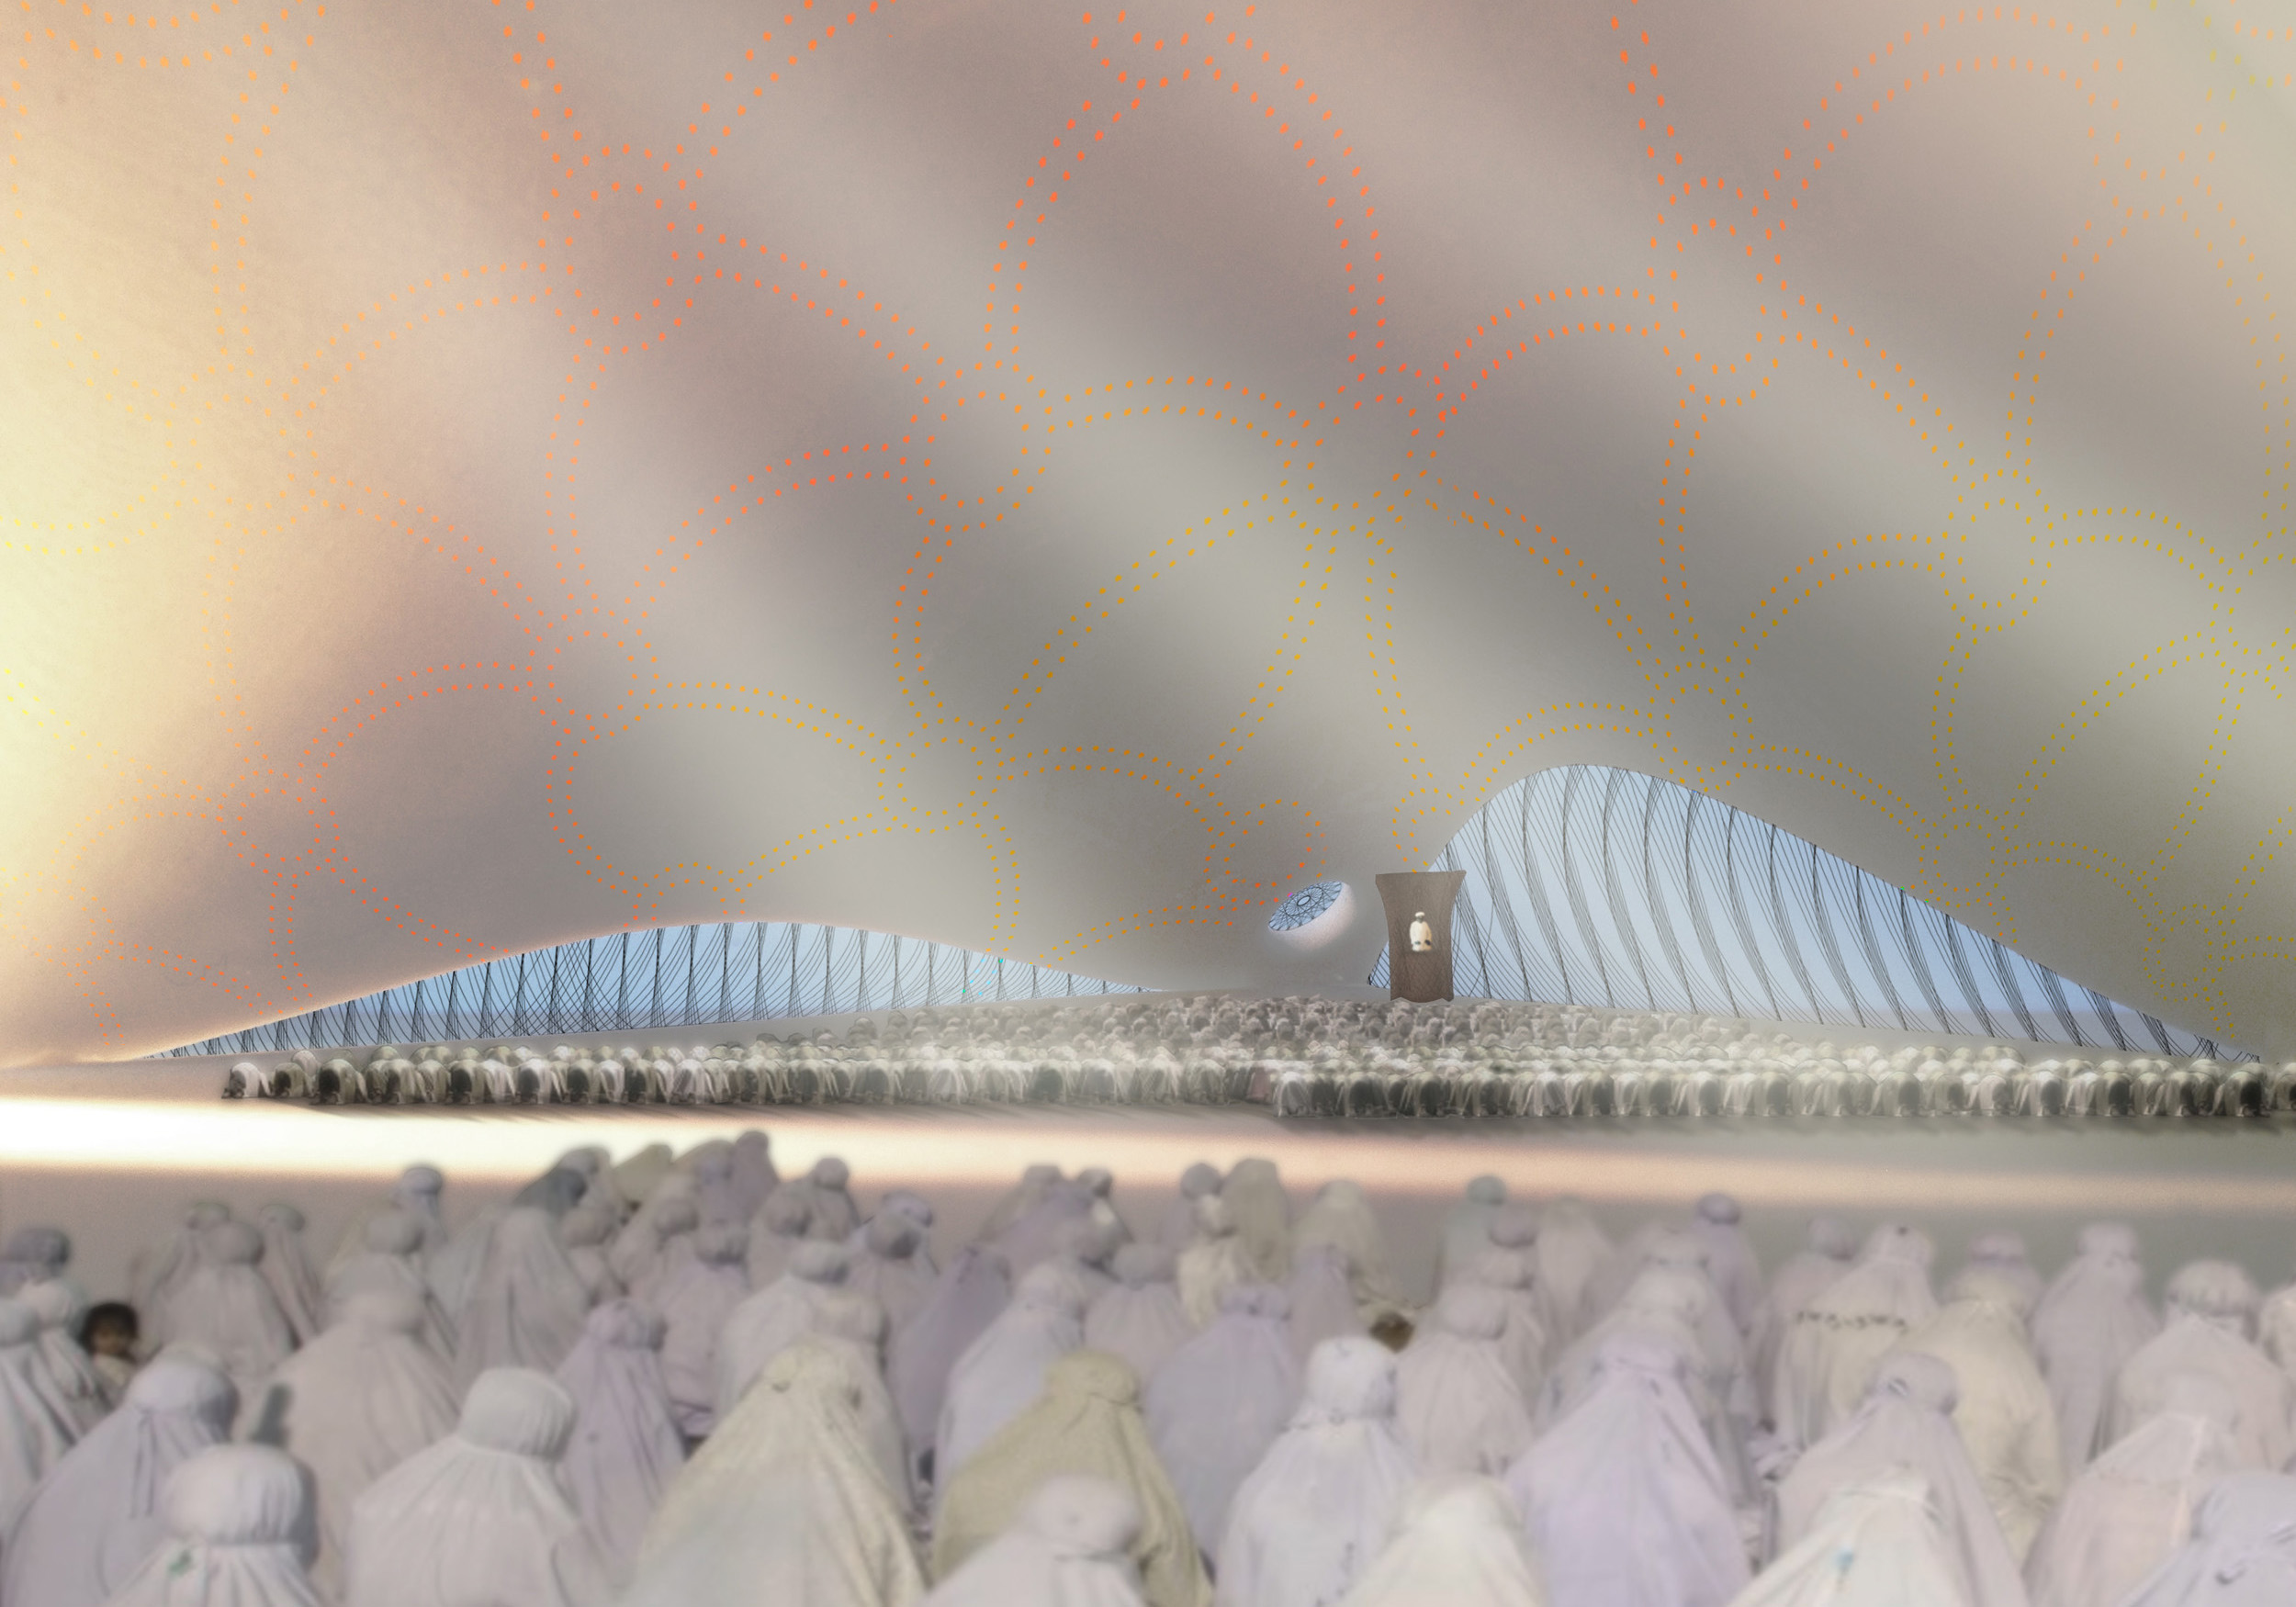 modern mosque prayer hall with ray of light dividing men and women